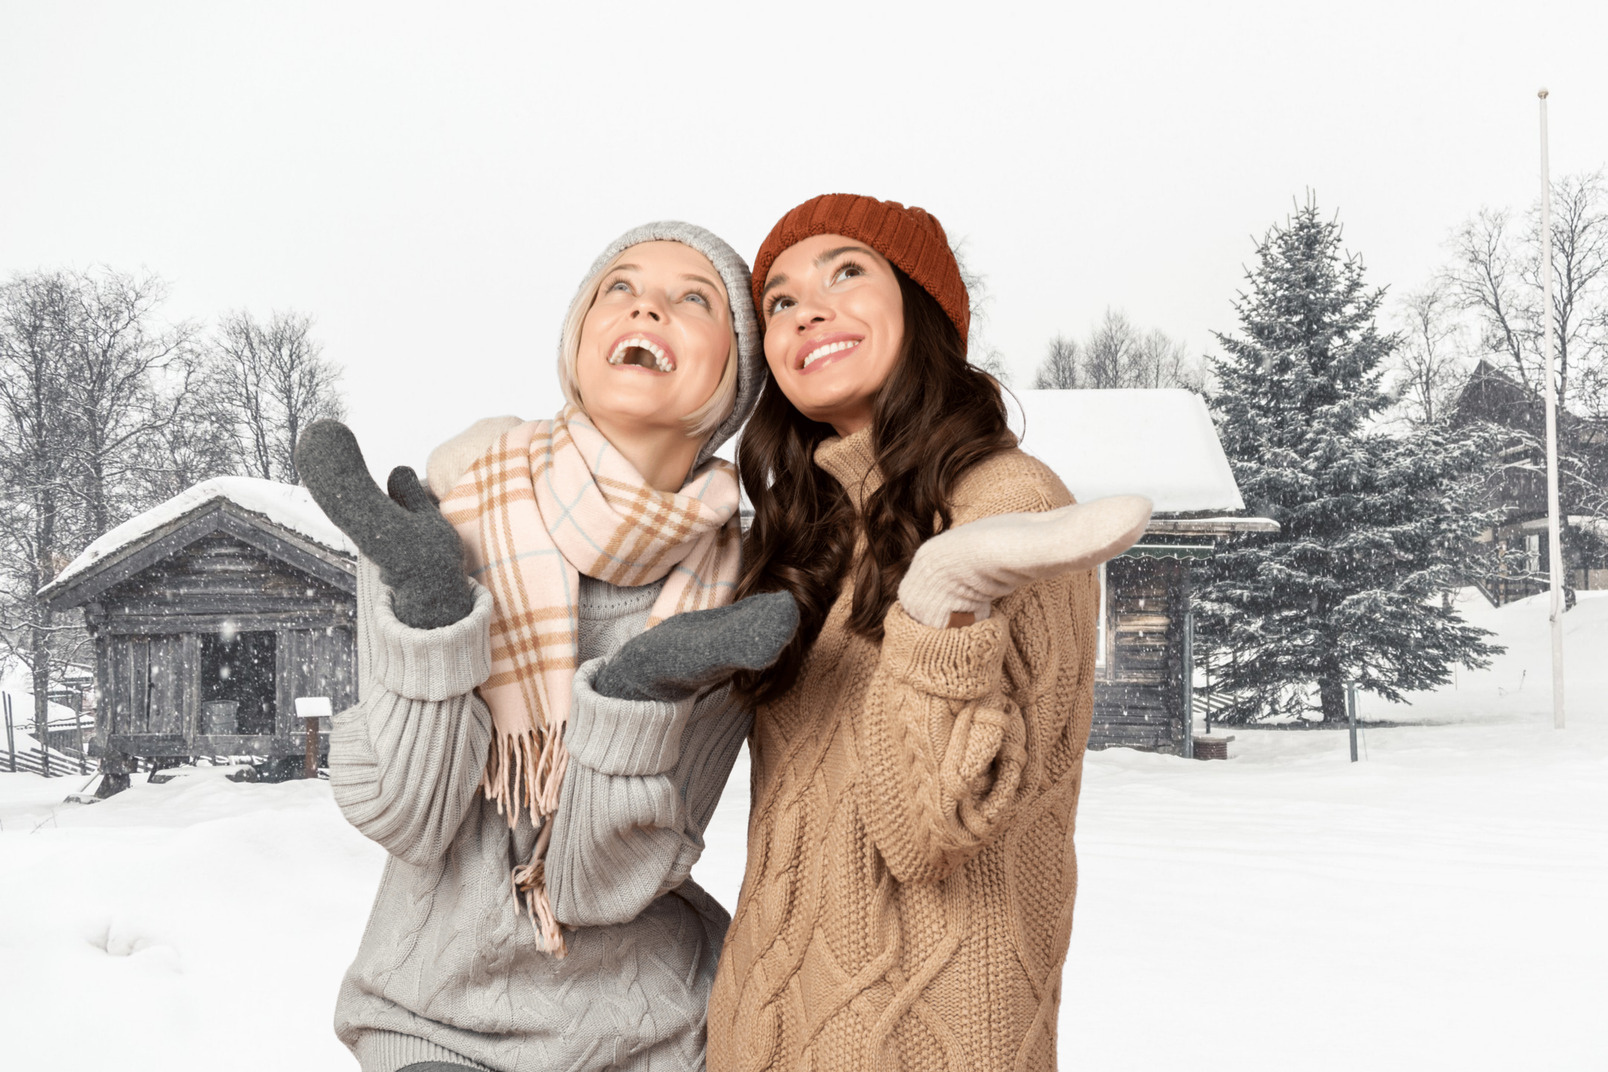 Two women standing outside and catching snowflakes